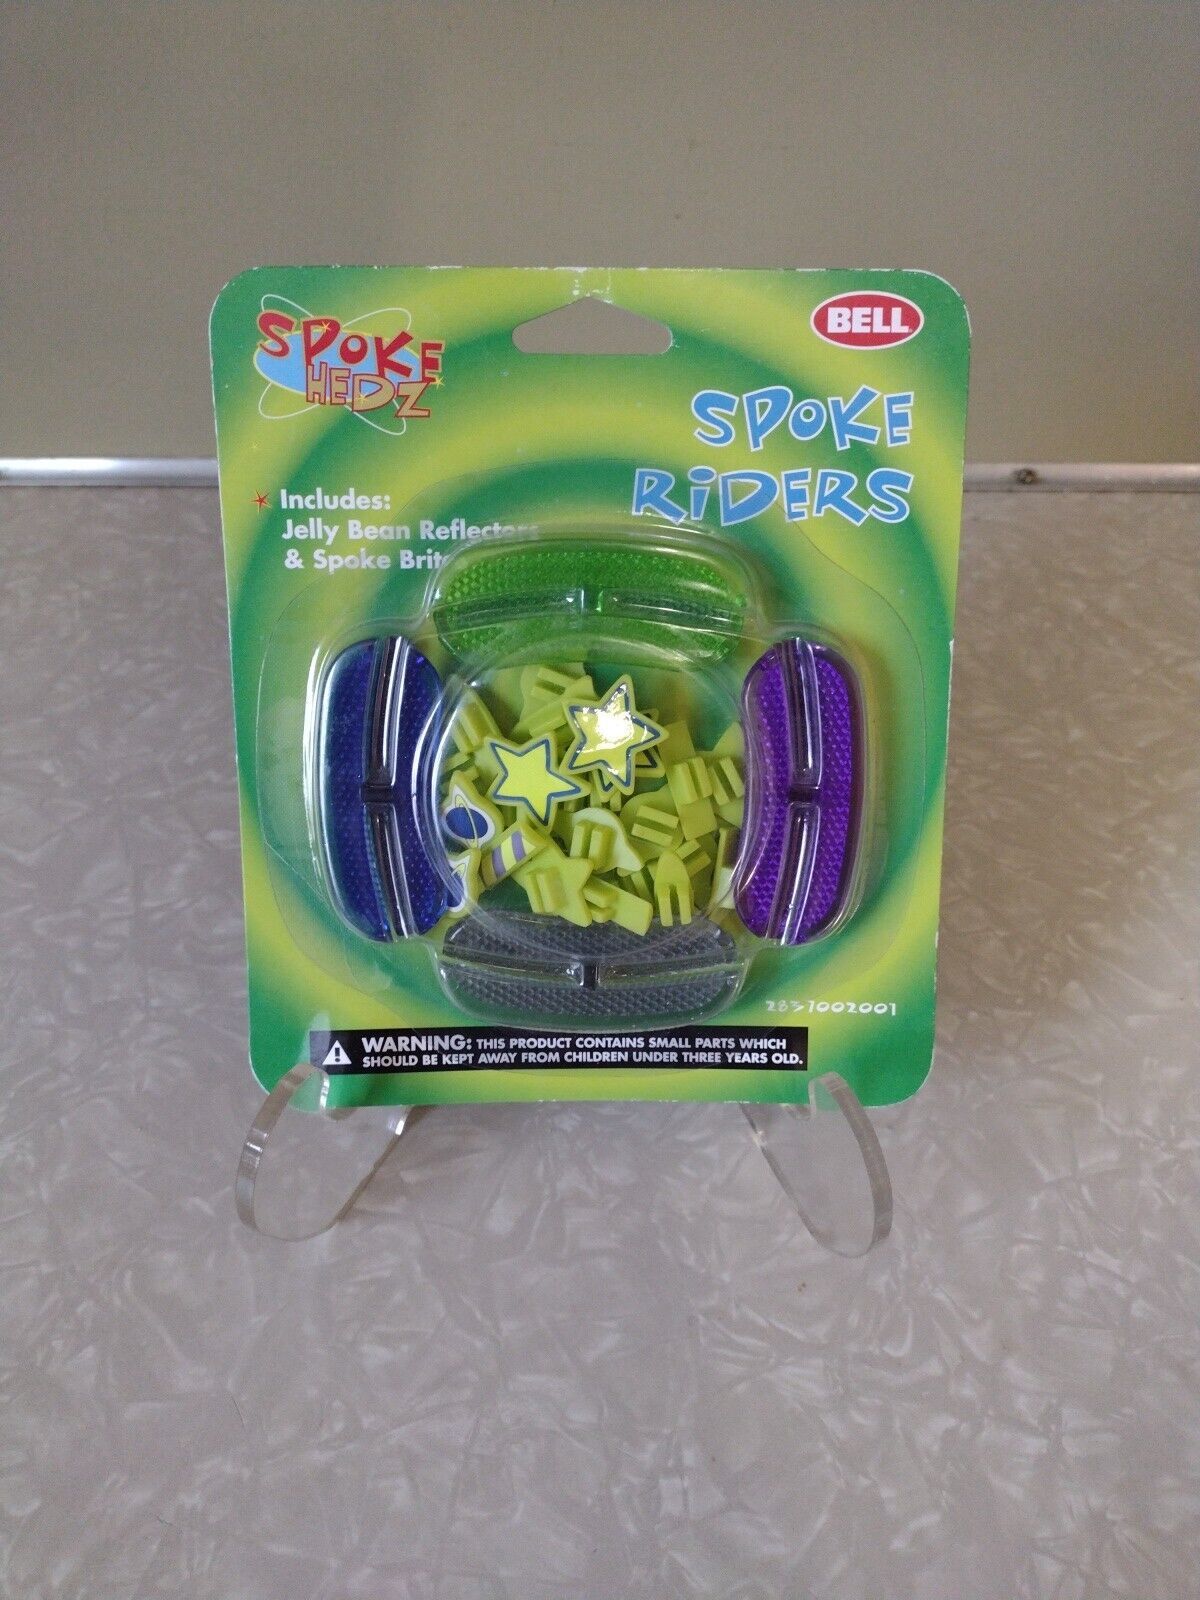 Primary image for Bell Spoke Hedz Spoke Riders w/ Jelly Bean Reflectors NEW UNOPENED Bike Bicycle